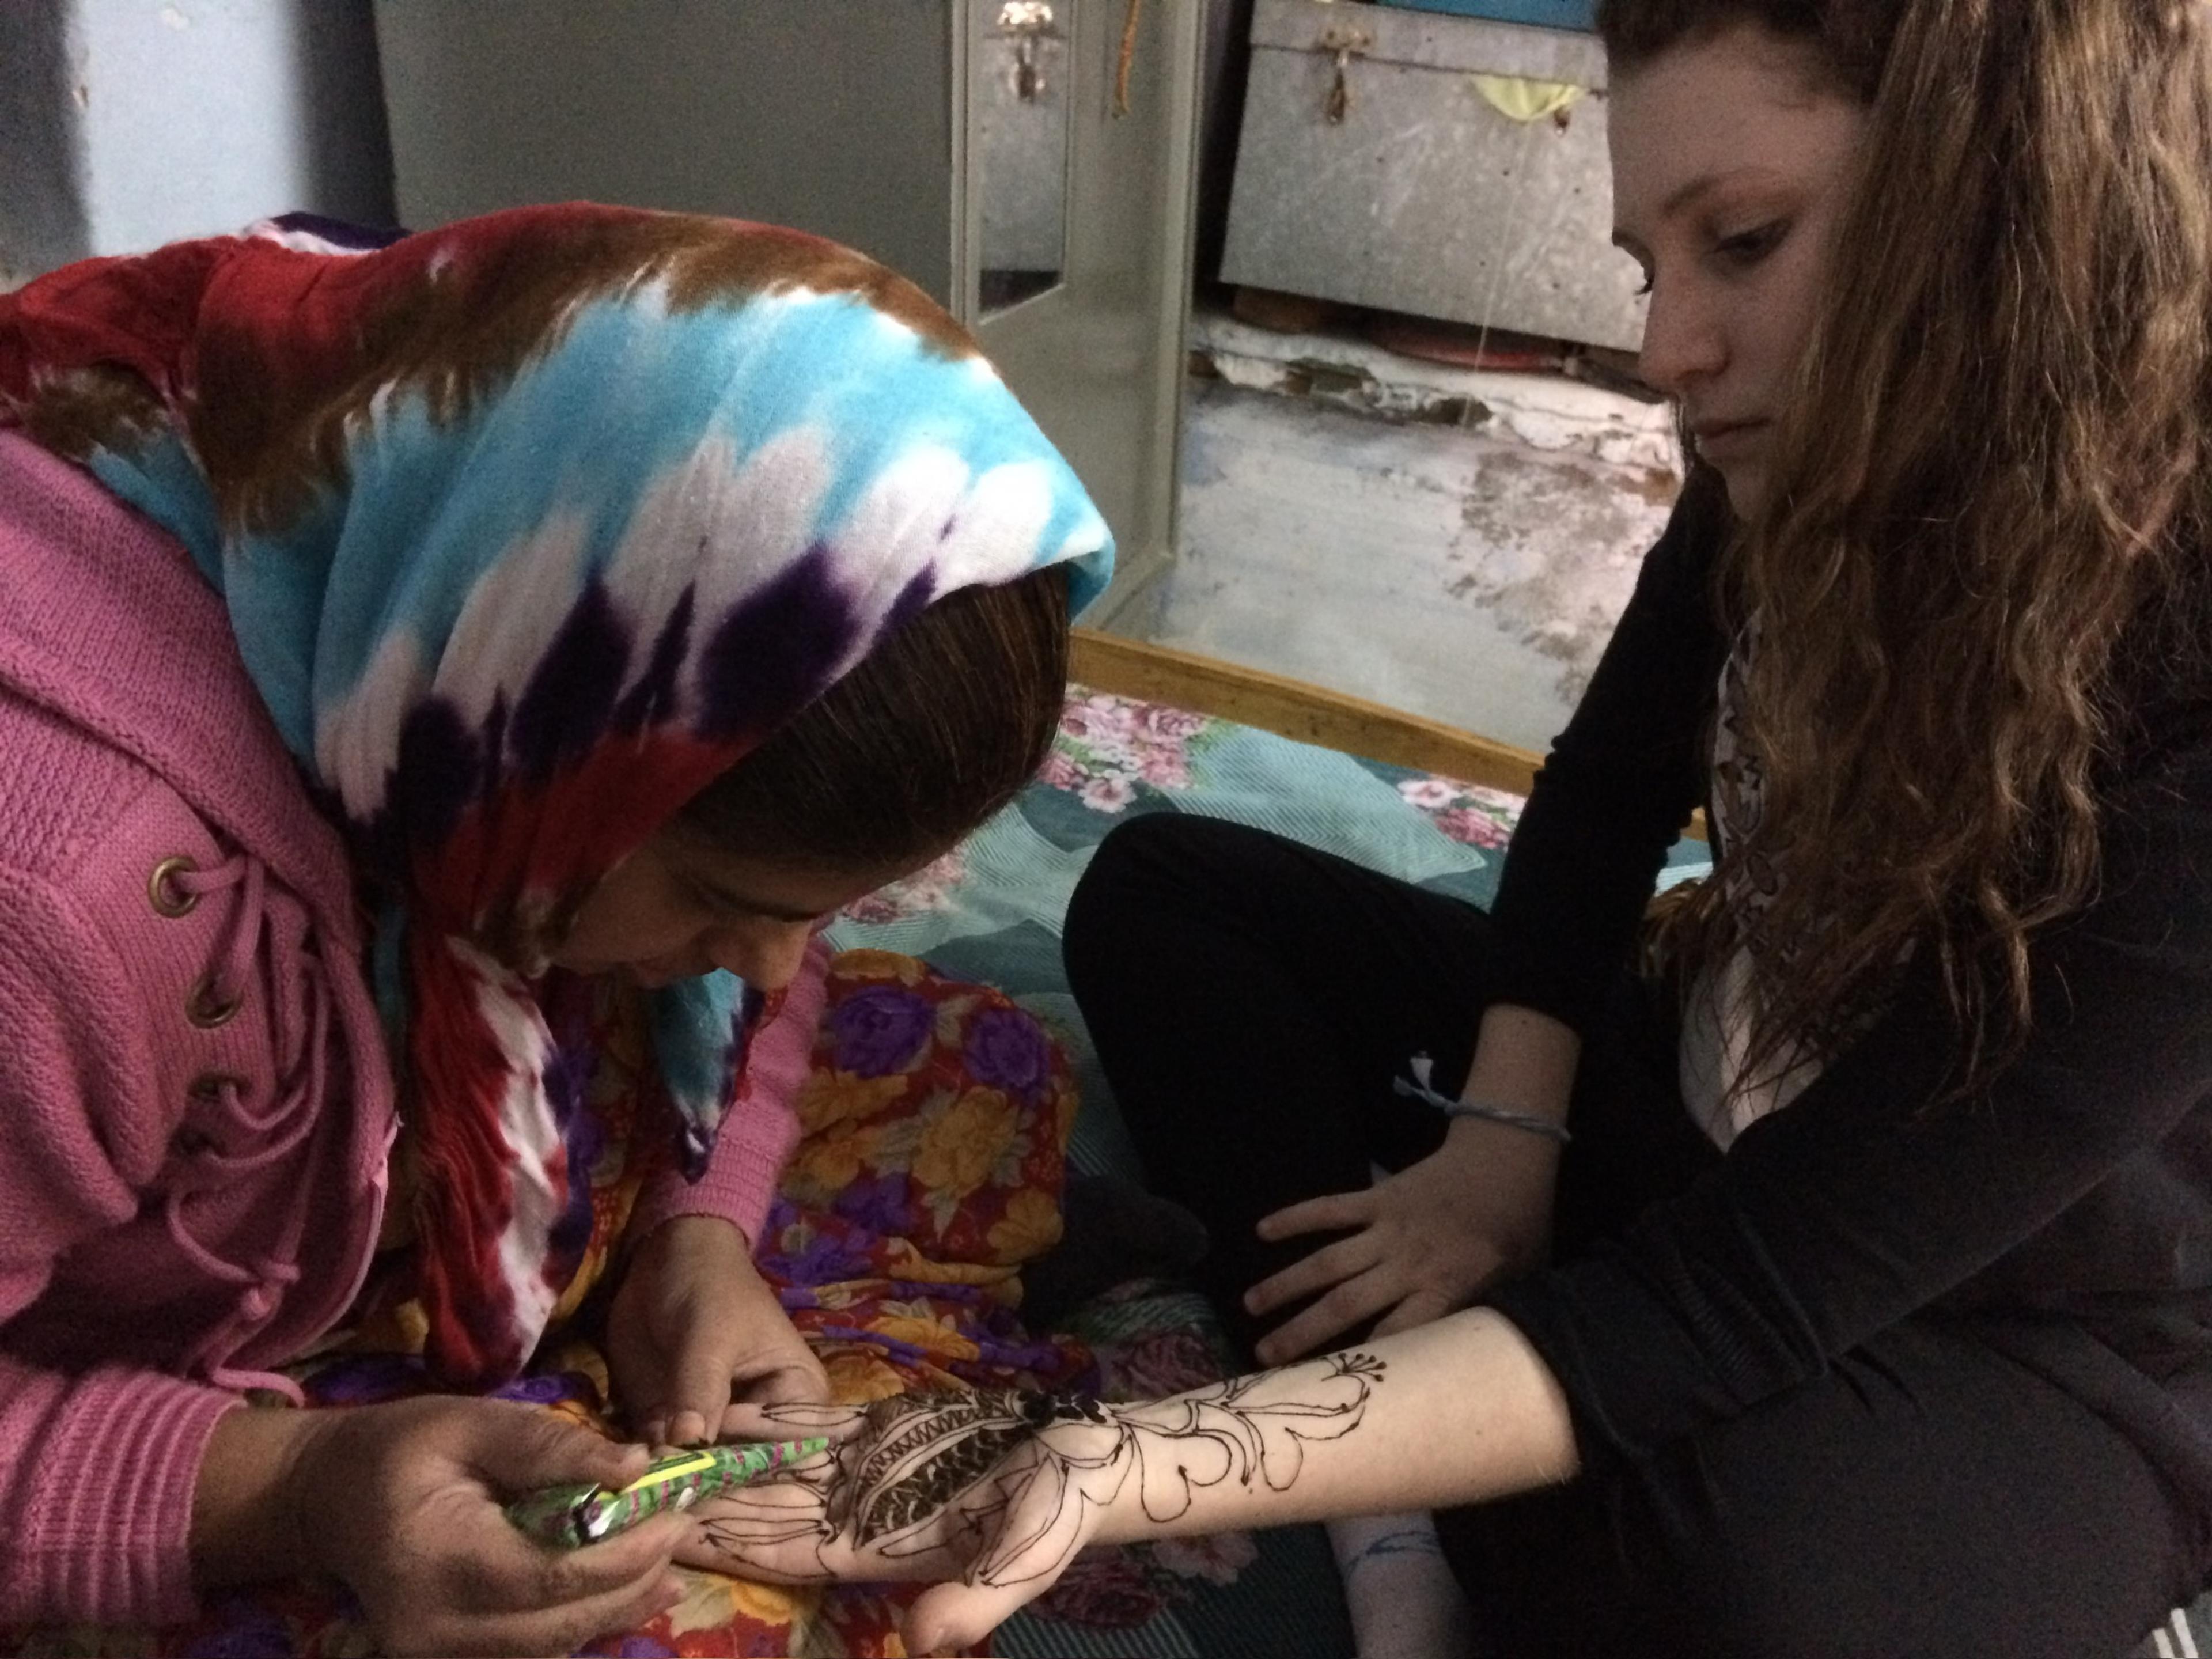 Woman getting henna on her hand